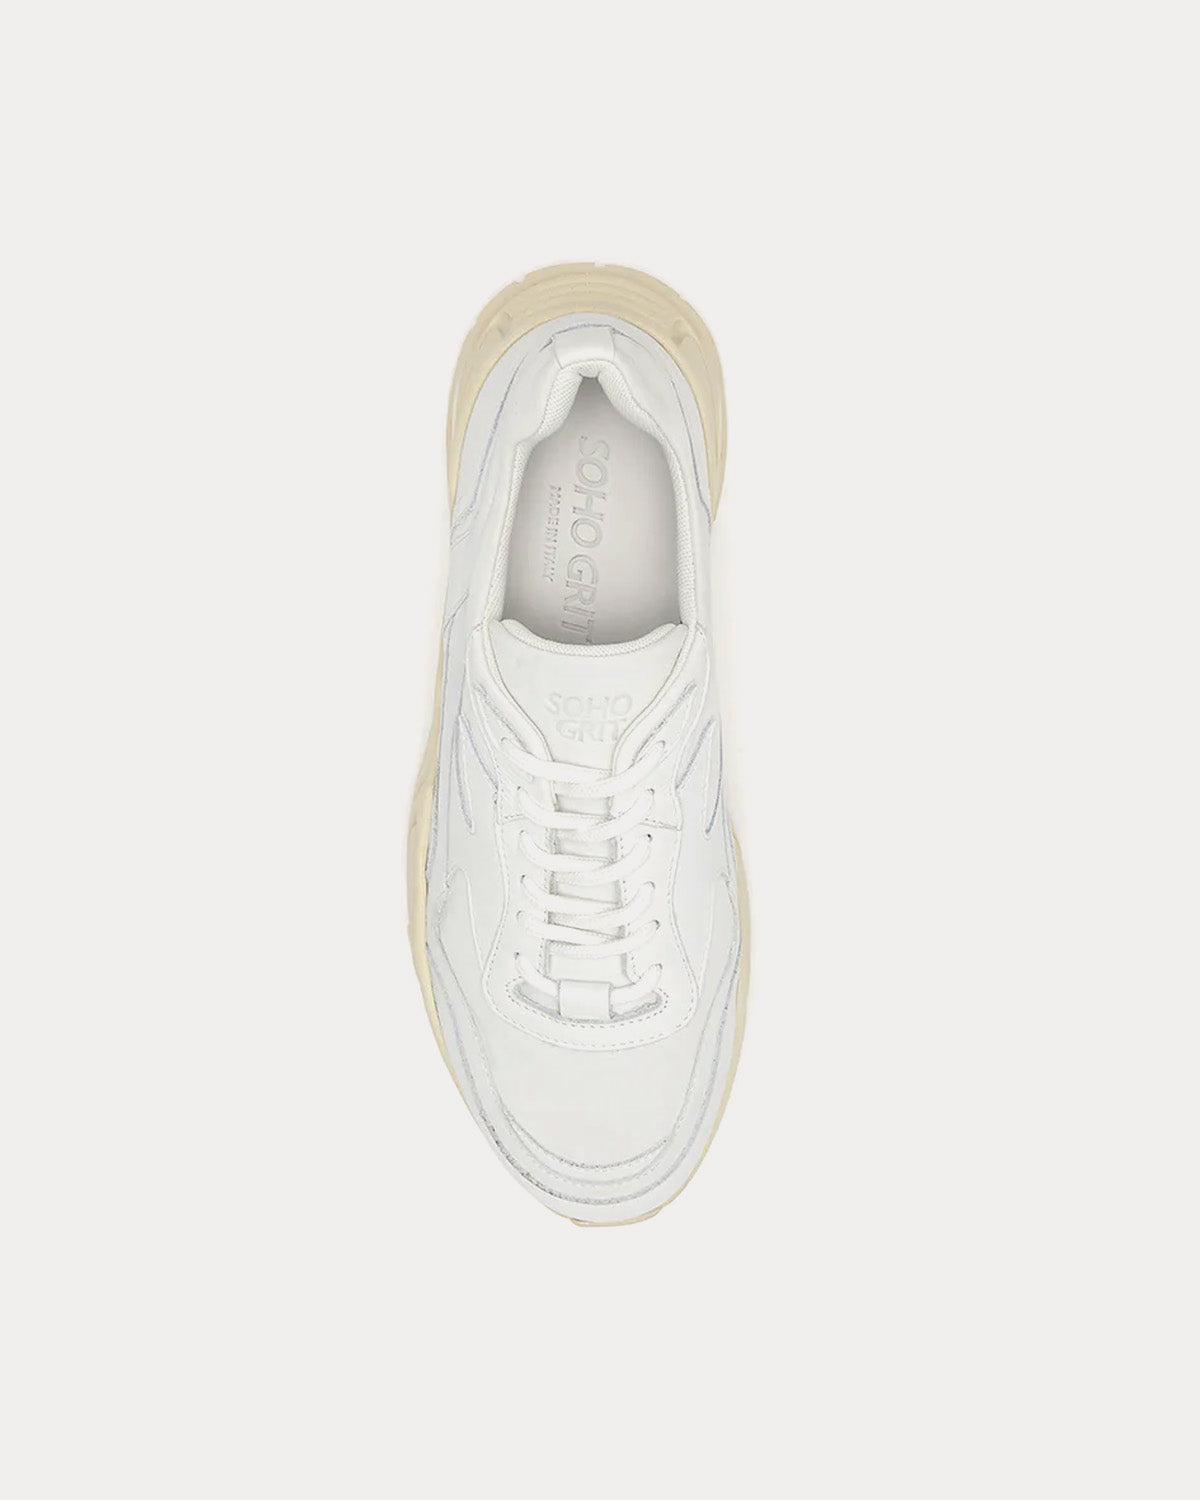 Soho Grit - The Hollen Off-White Low Top Sneakers